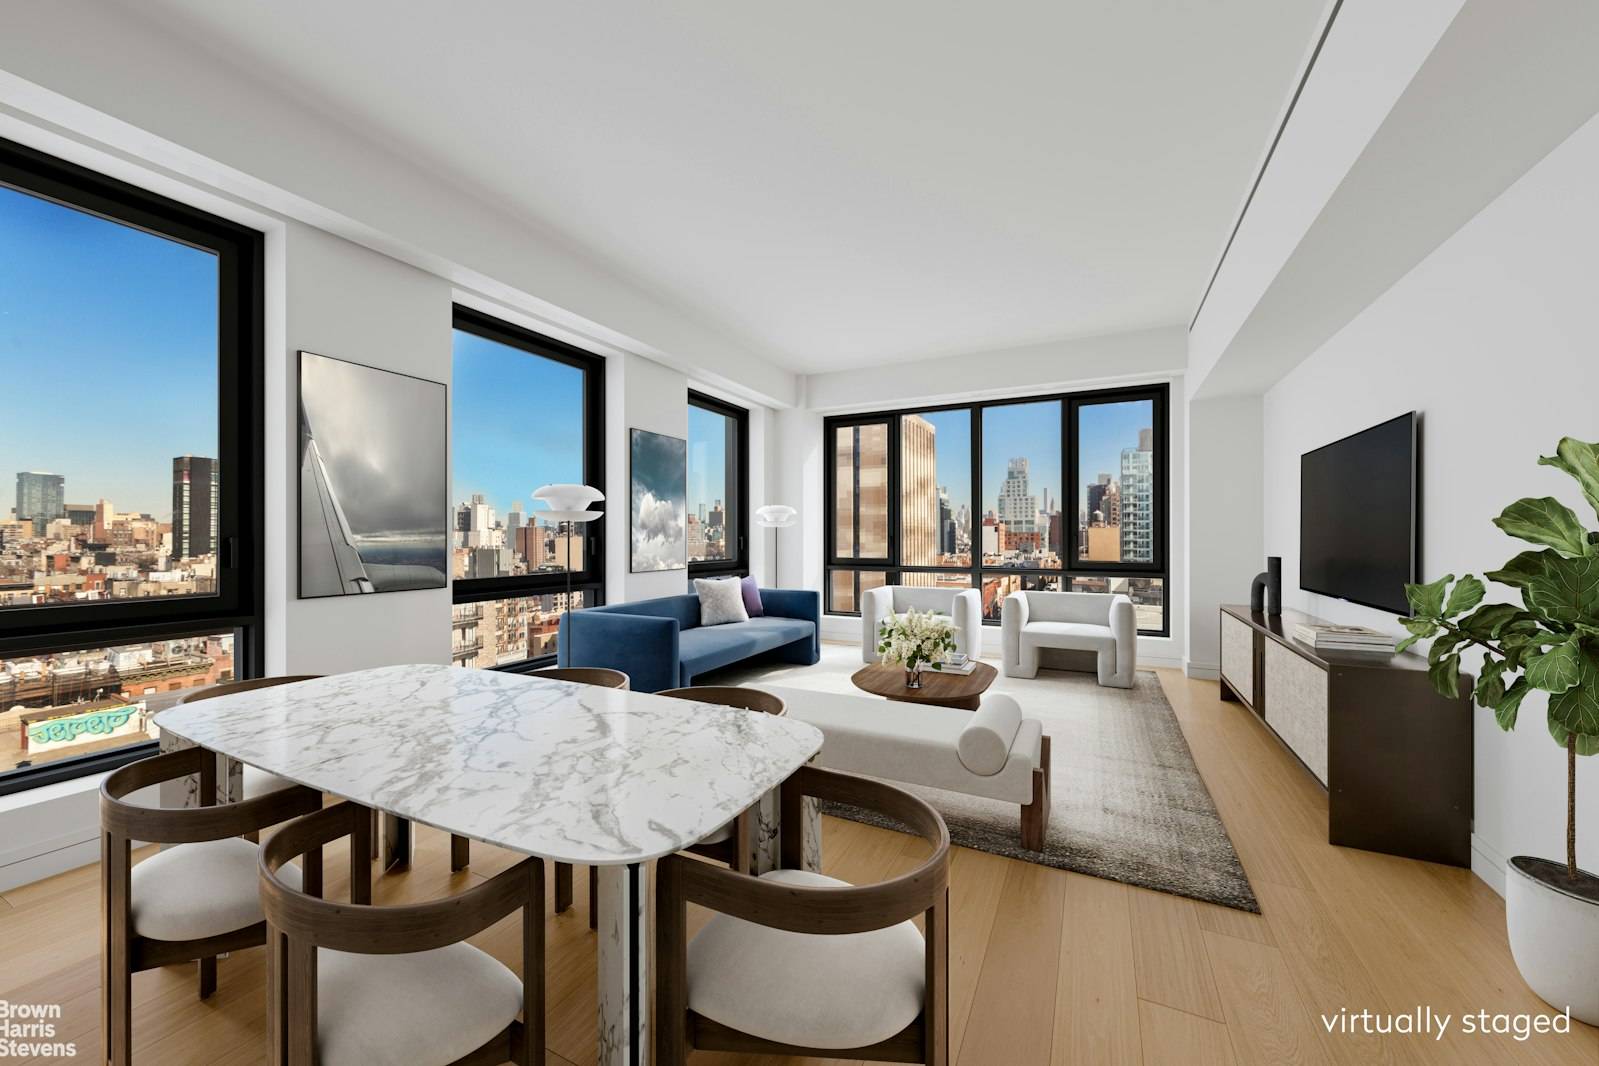 Enjoy spectacular light and mesmerizing views from this impeccably sited modern home that sits at the nexus of the Lower East Side, one of New York's most fashionable and storied ...